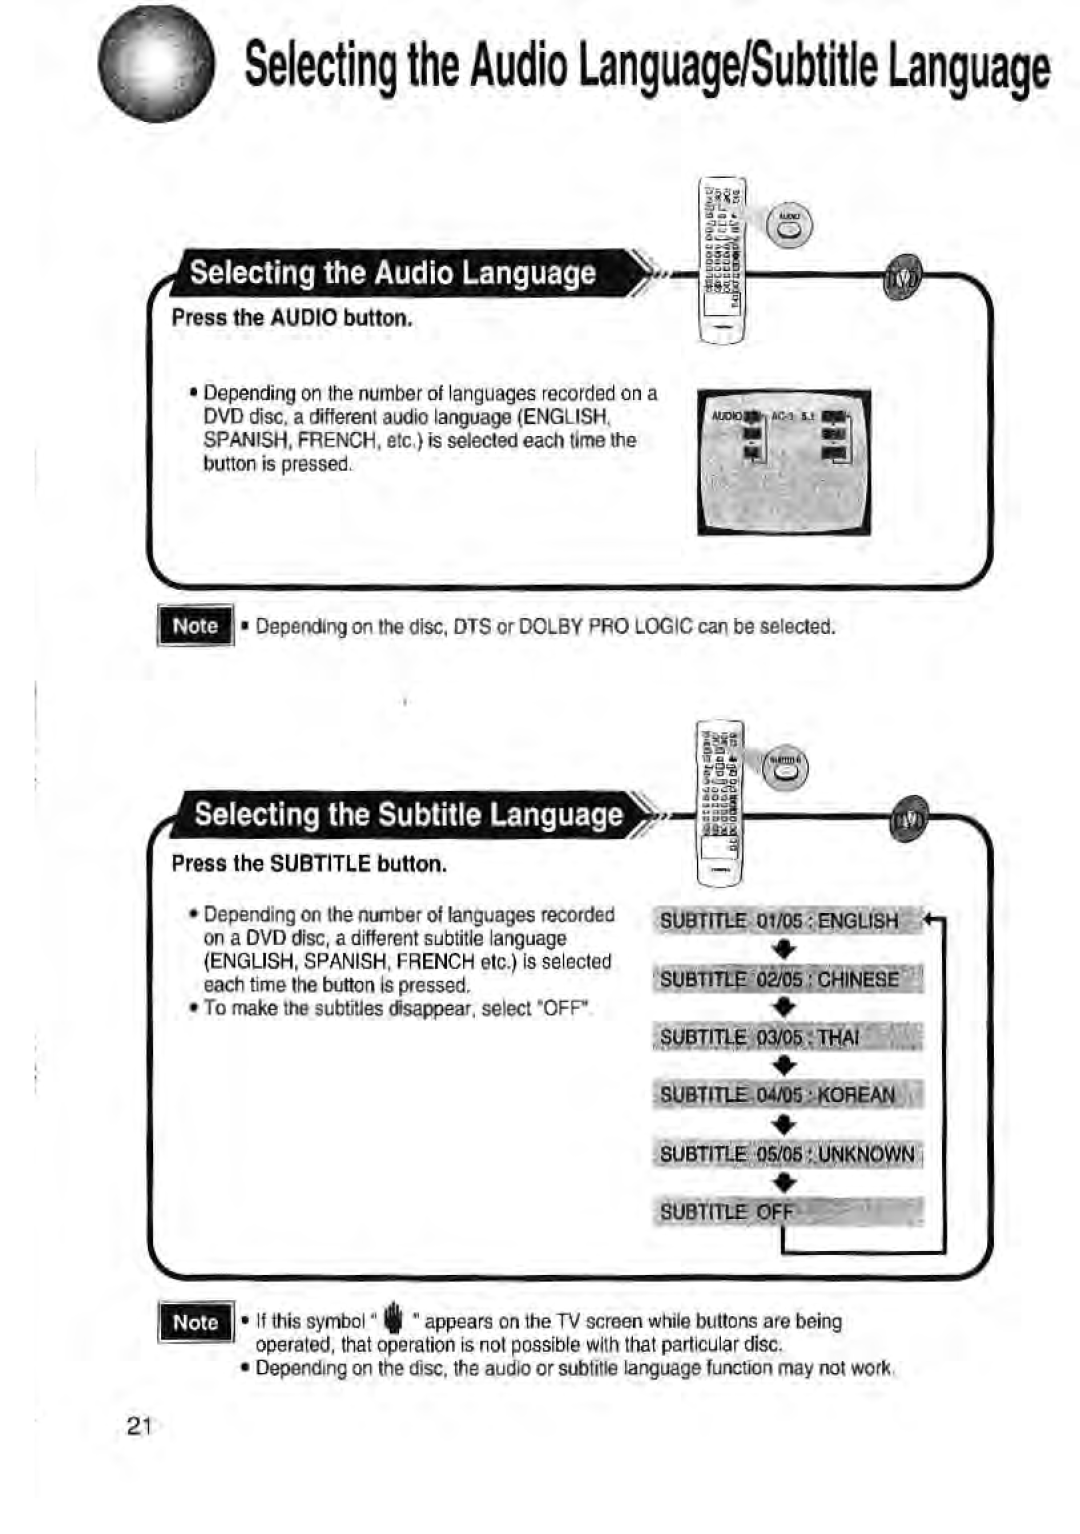 Toshiba SD-43HK owner manual Selecting the Audio Language, Selecting the Subtitle Language, Press the SUBTITLE button 